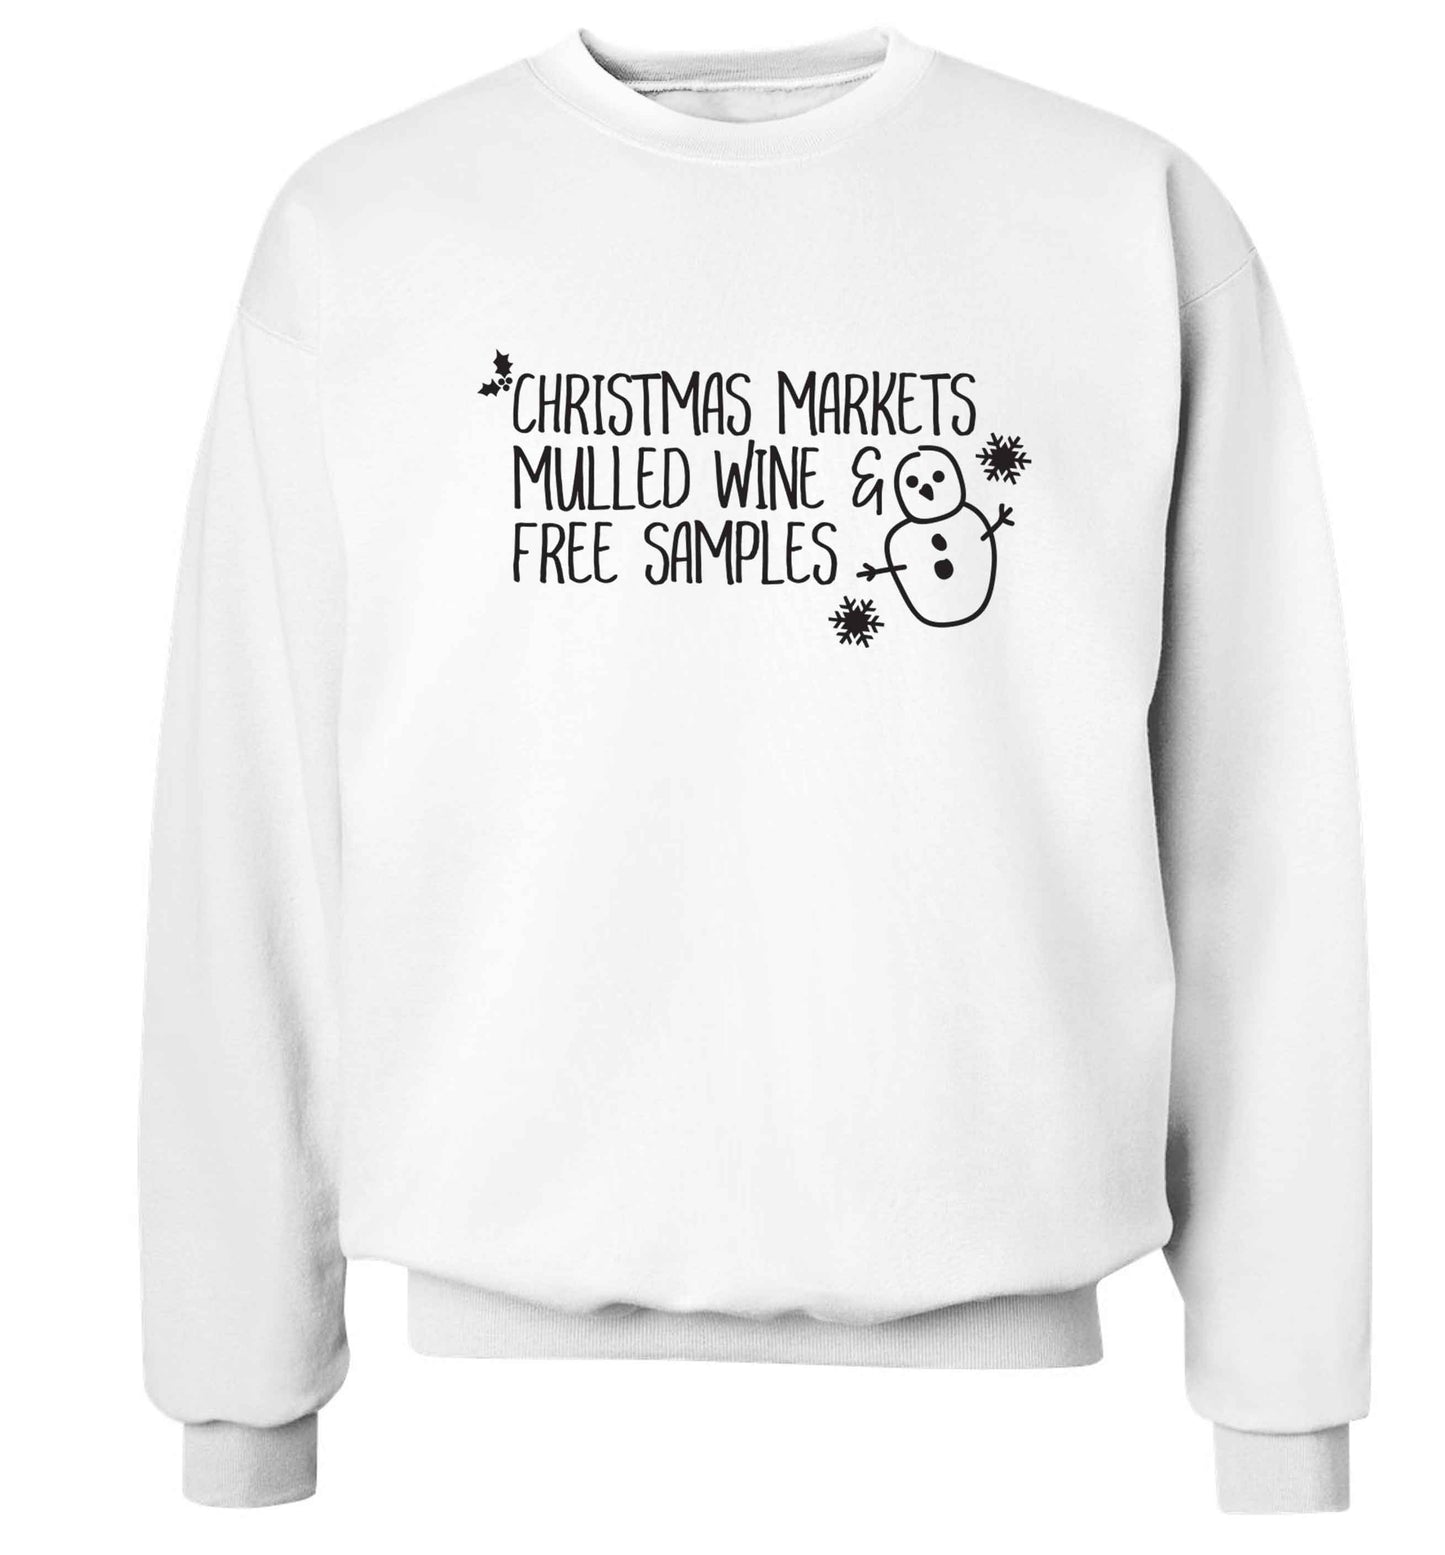 Christmas market mulled wine & free samples Adult's unisex white Sweater 2XL